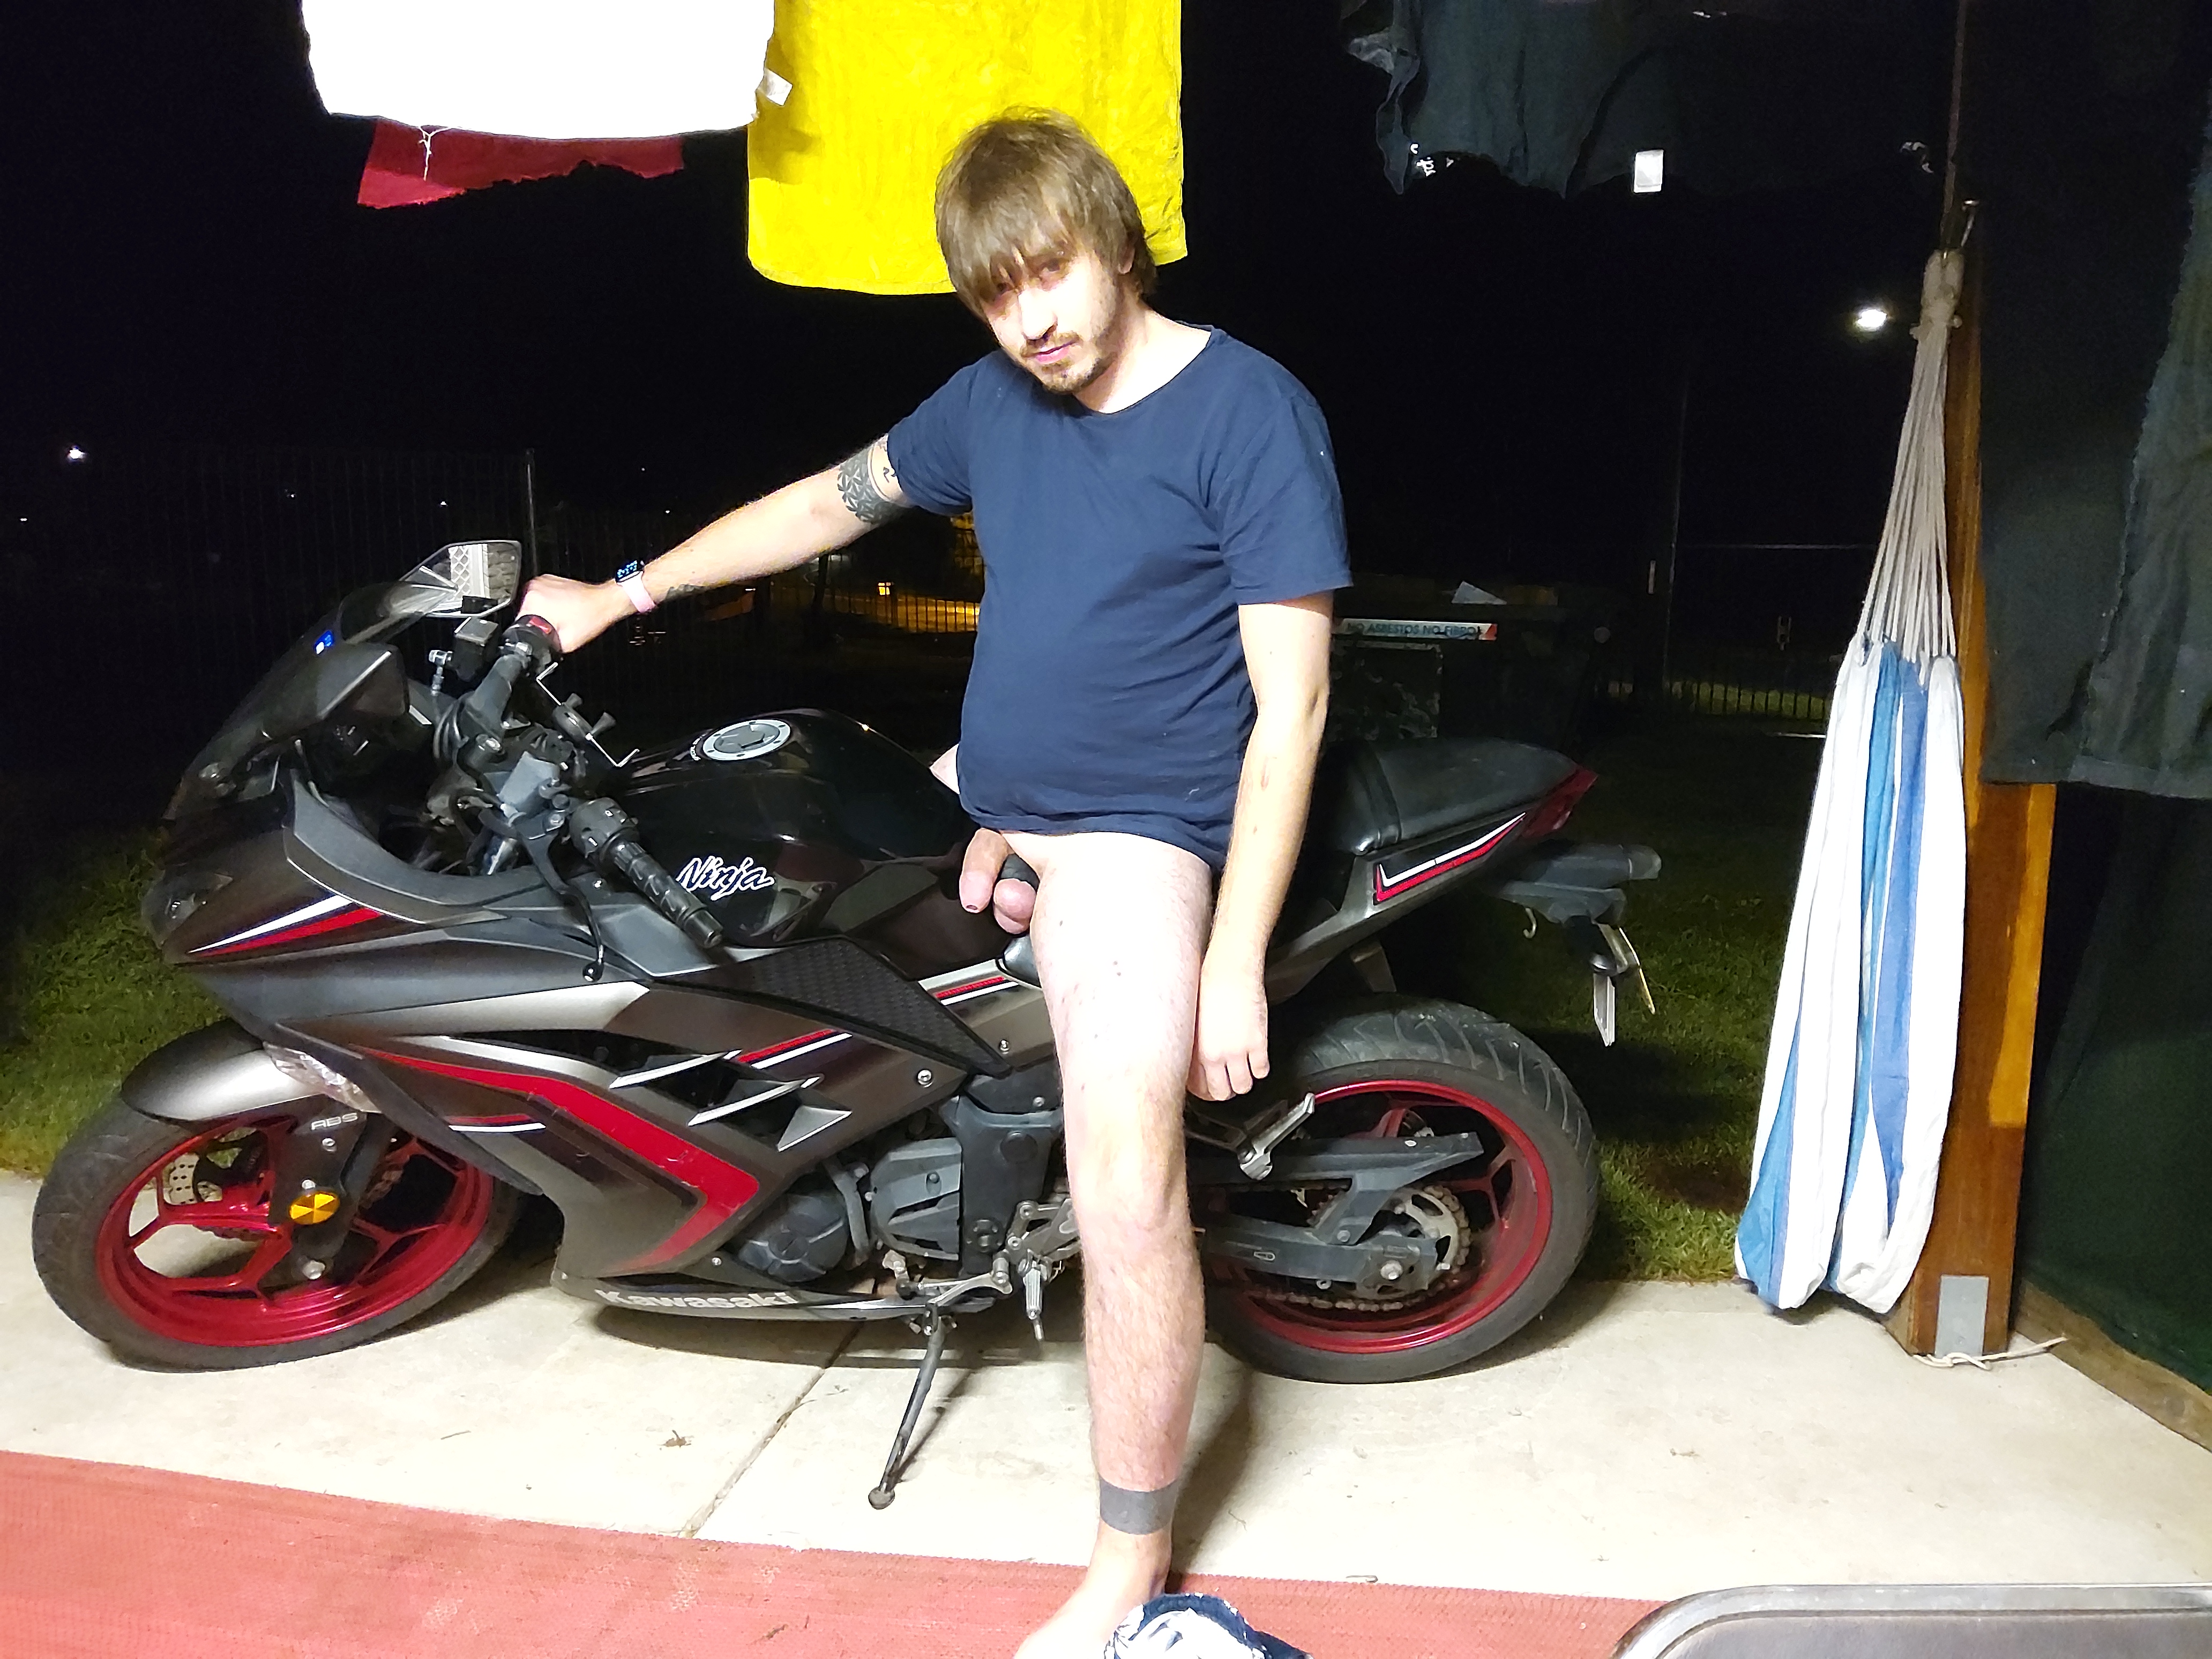 Outside on my motorbike exposing my cock